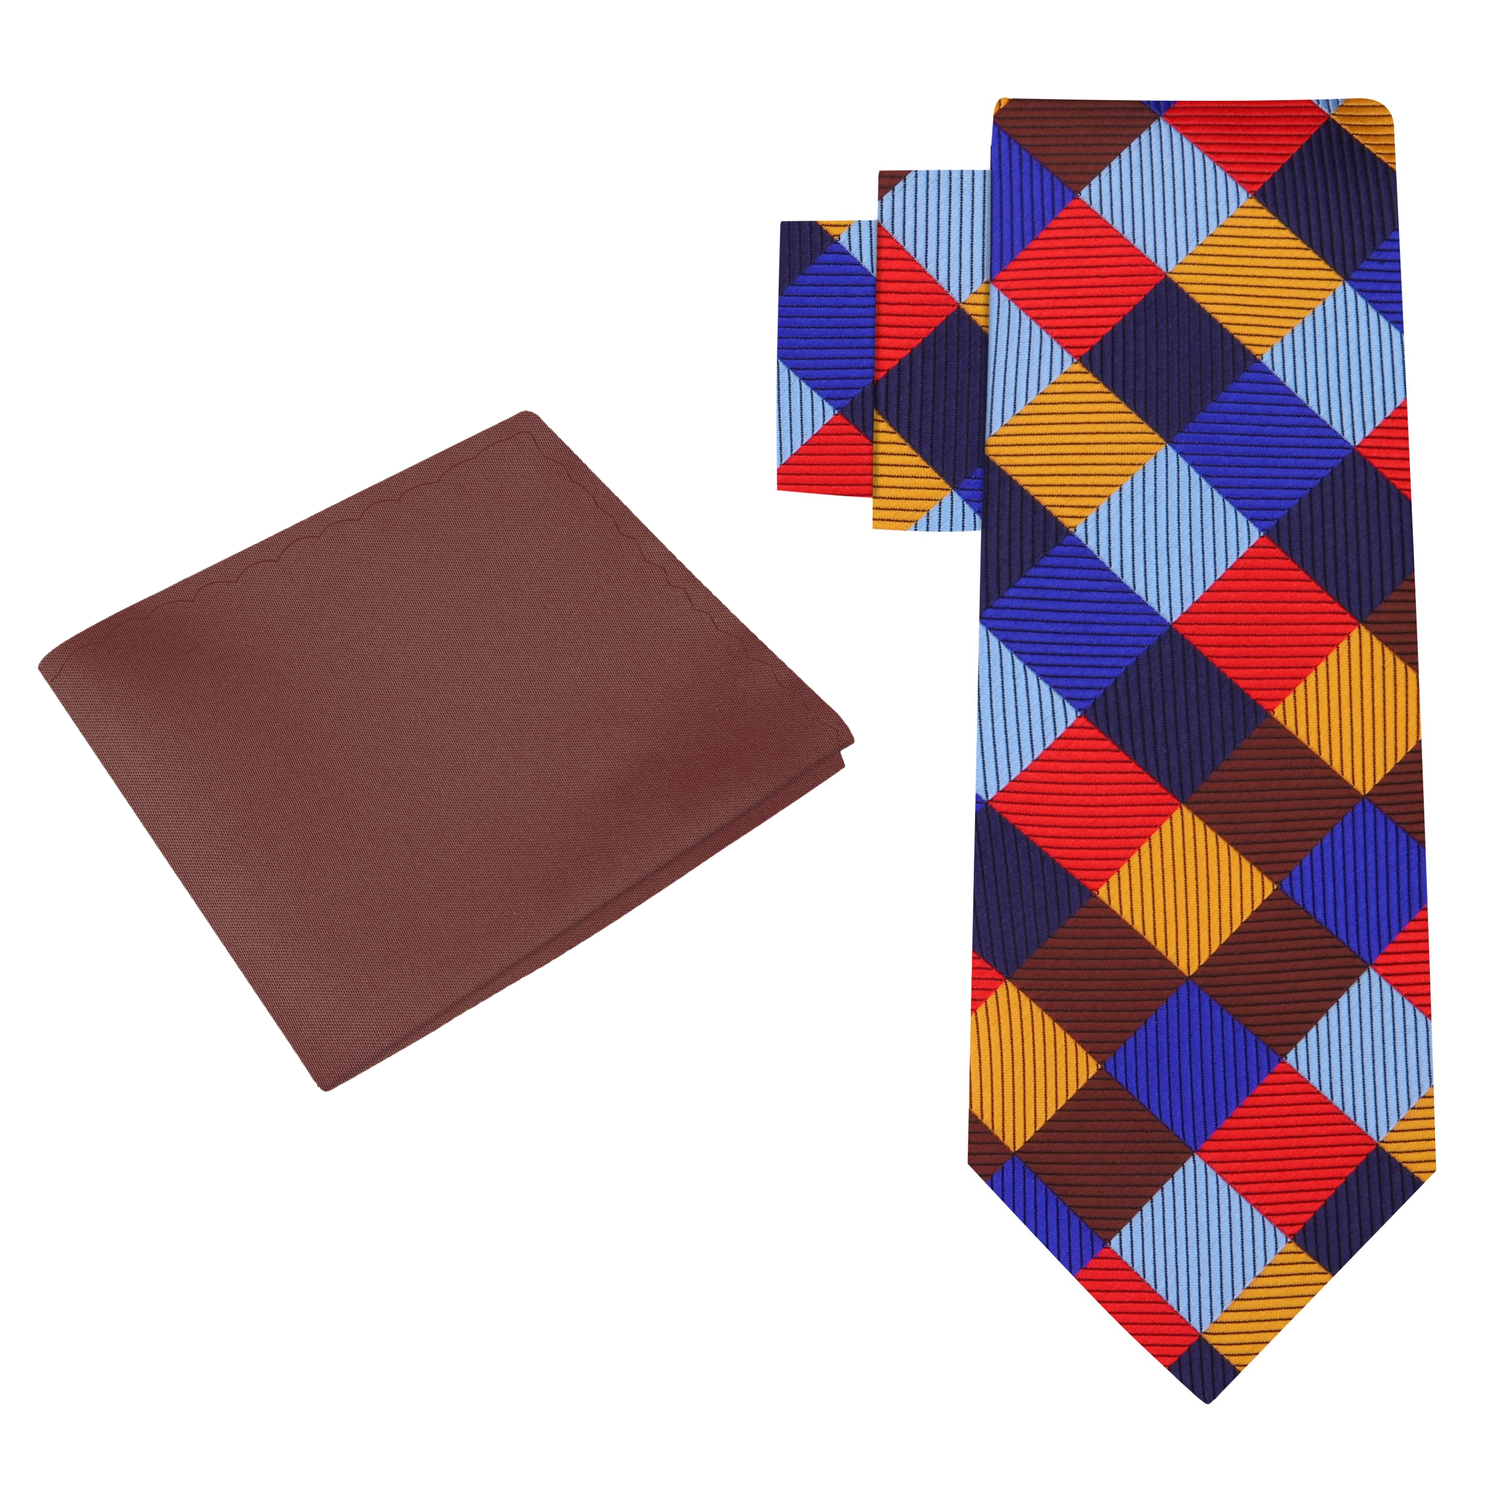 View 2: A Red, Blue, Yellow, Light Blue Color Checker Pattern Silk Necktie, Brown Pocket Square